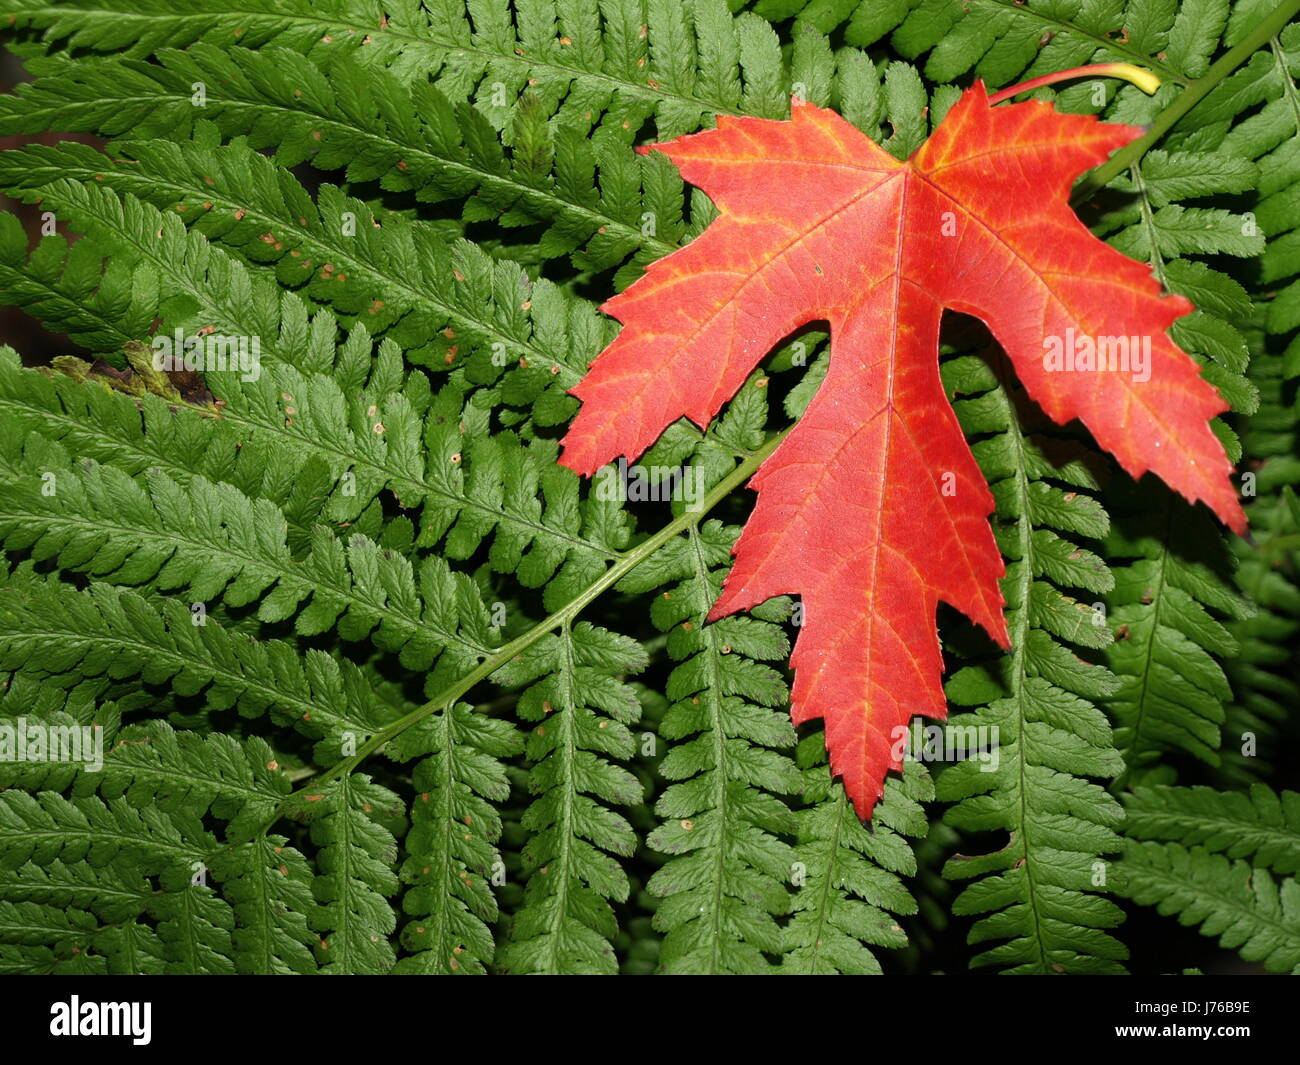 Red coalition stock photography - Alamy